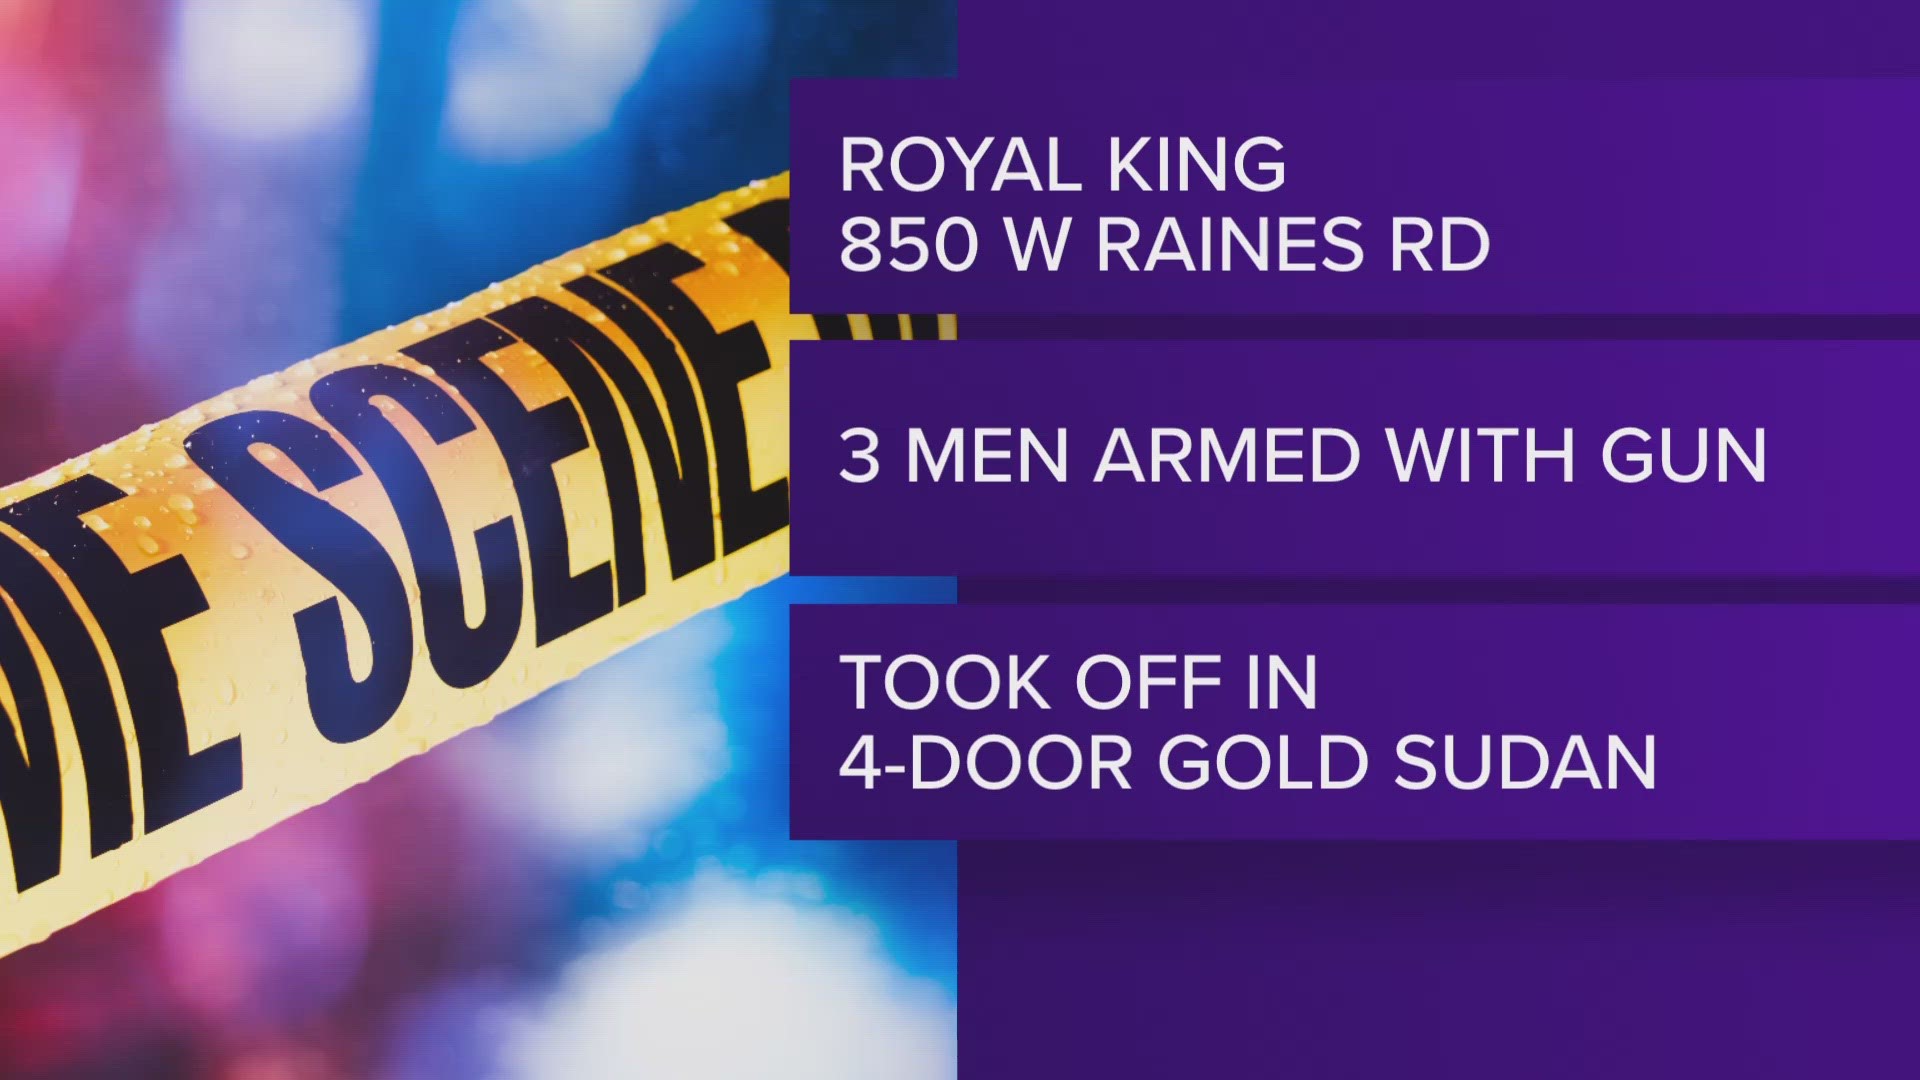 MPD said the incident took place on 850 West Raines Road. This address is the Royal King convenience store  — located west of the Memphis International Airport.